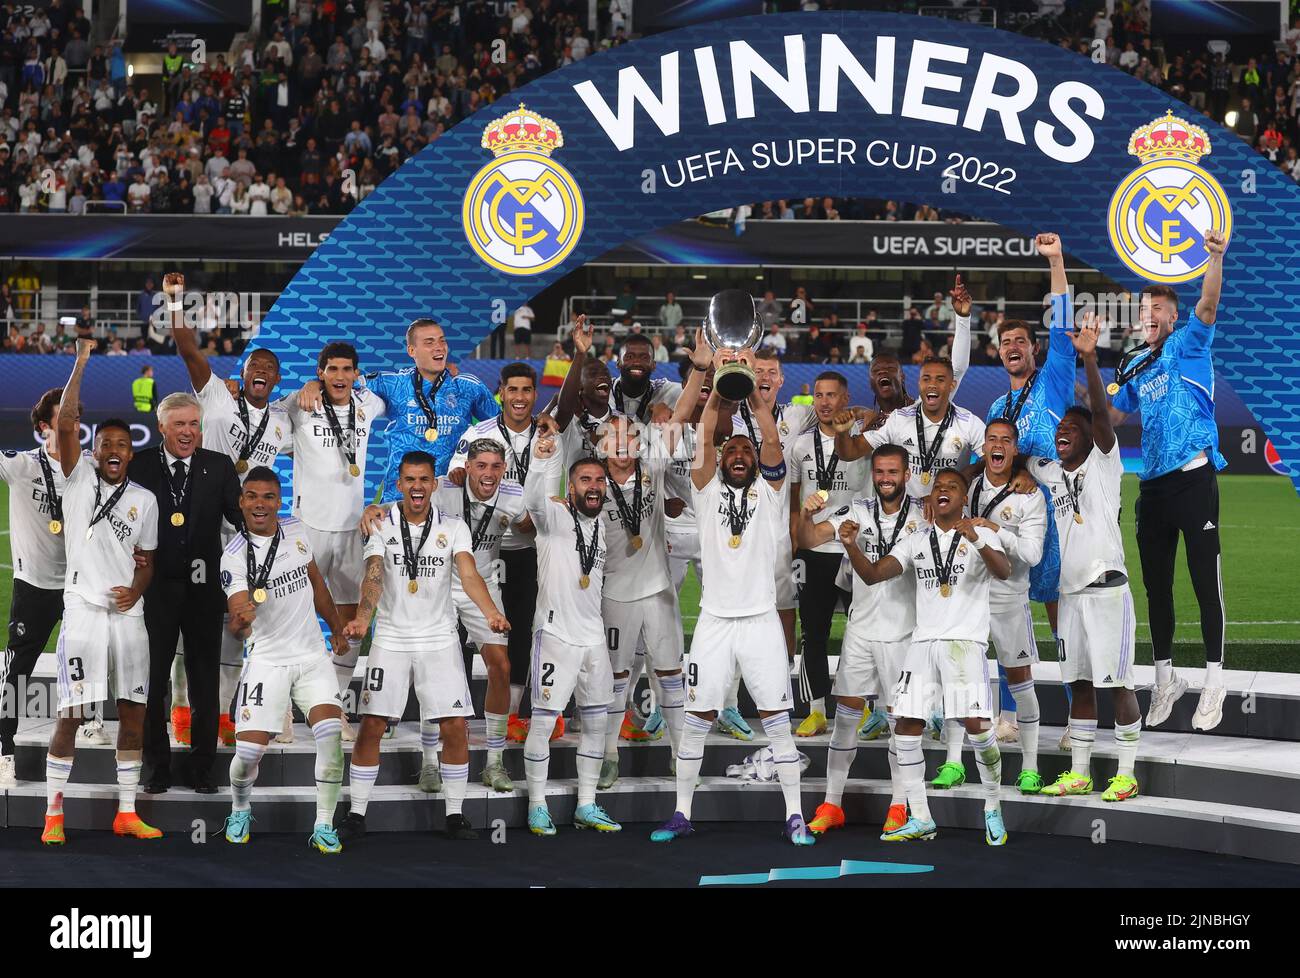 Soccer Football - European Super Cup - Real Madrid v Eintracht Frankfurt - Helsinki Olympic Stadium, Helsinki, Finland - August 10, 2022 Real Madrid's Karim Benzema lifts the trophy as he celebrates with teammates after winning the European Super Cup REUTERS/Kai Pfaffenbach     TPX IMAGES OF THE DAY Stock Photo